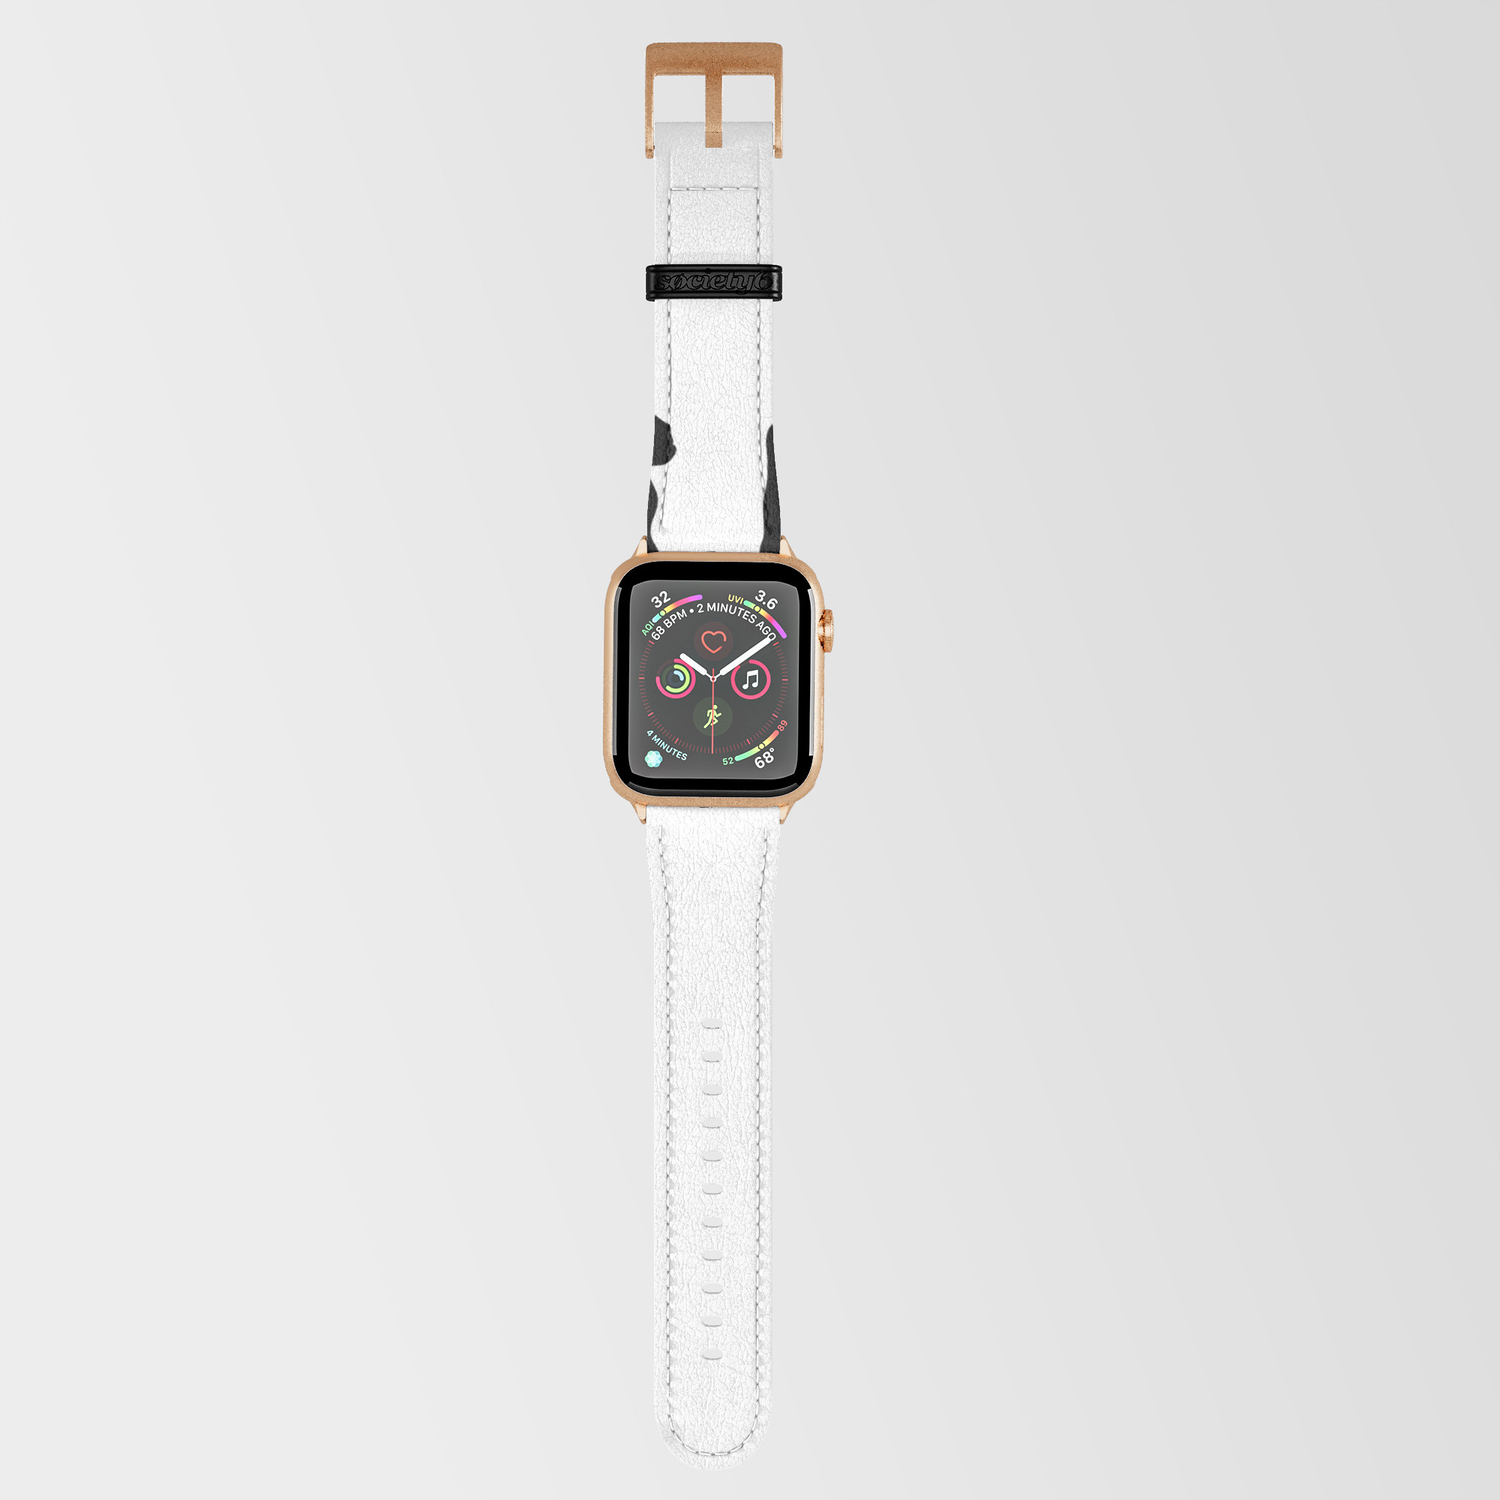 Karate Evolution Martial Arts Judo Apple Watch Band by favorite-shirts Society6